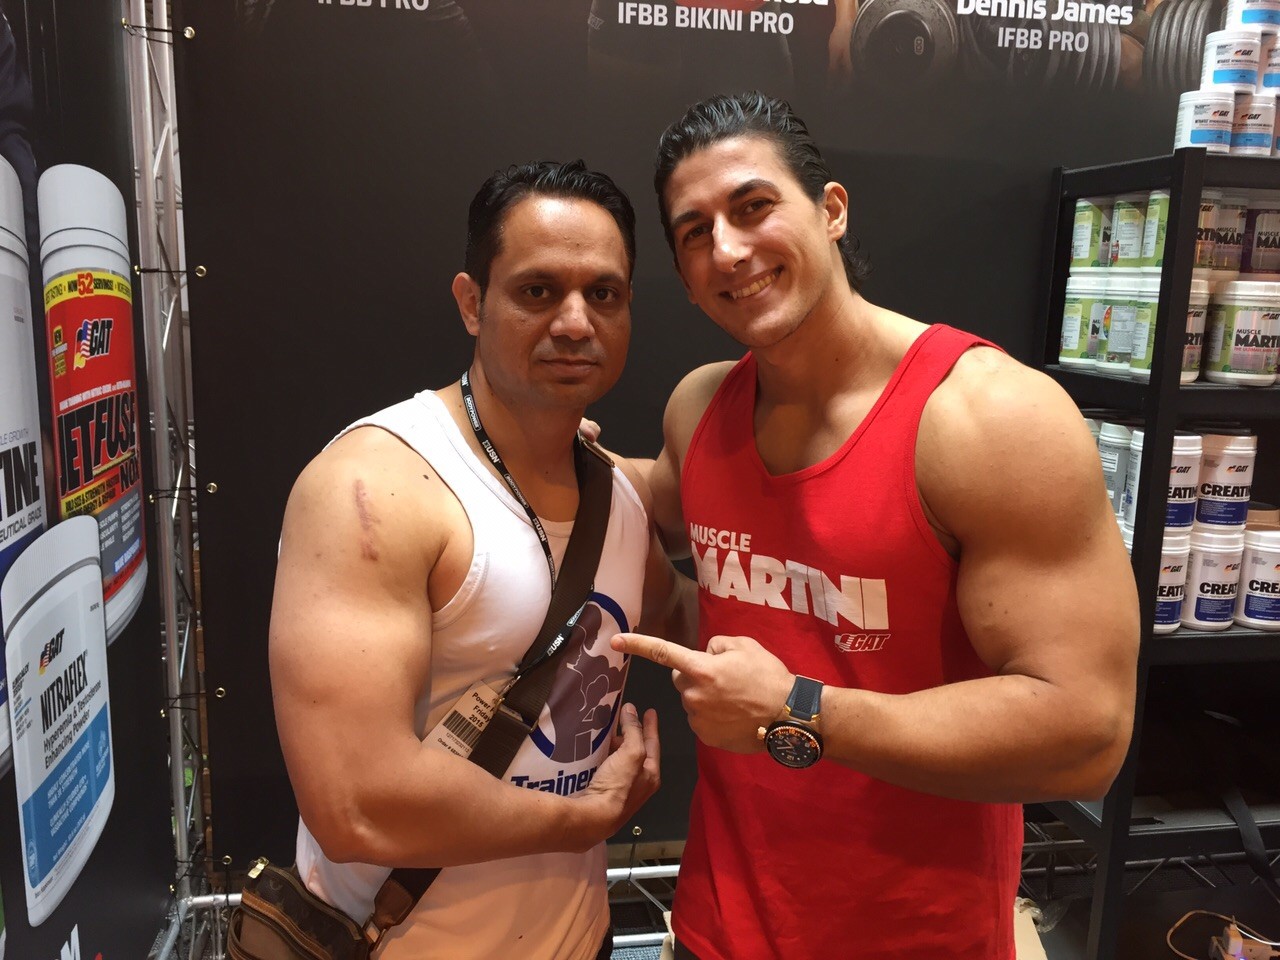 the largest fitness expo in the world